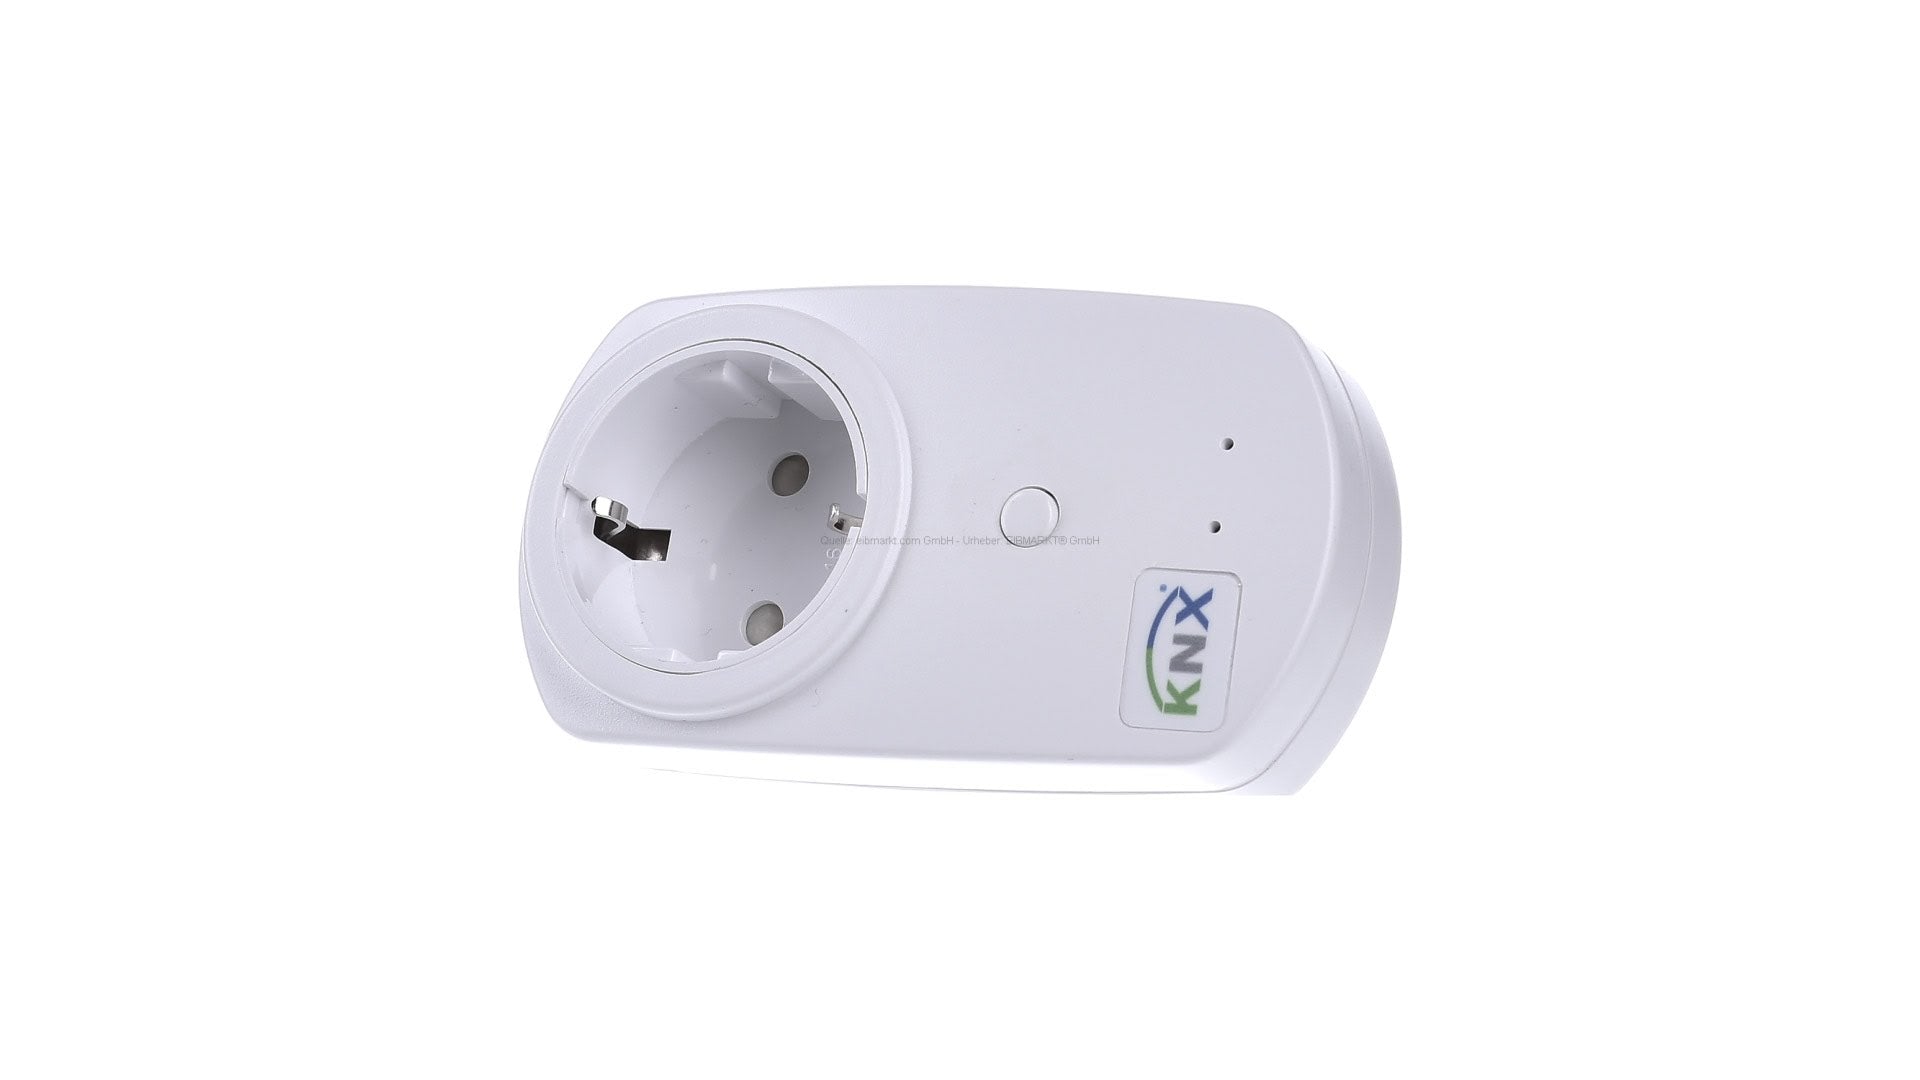 MDT KNX Wireless Technology. RF+ in plug adapter with active power measurement